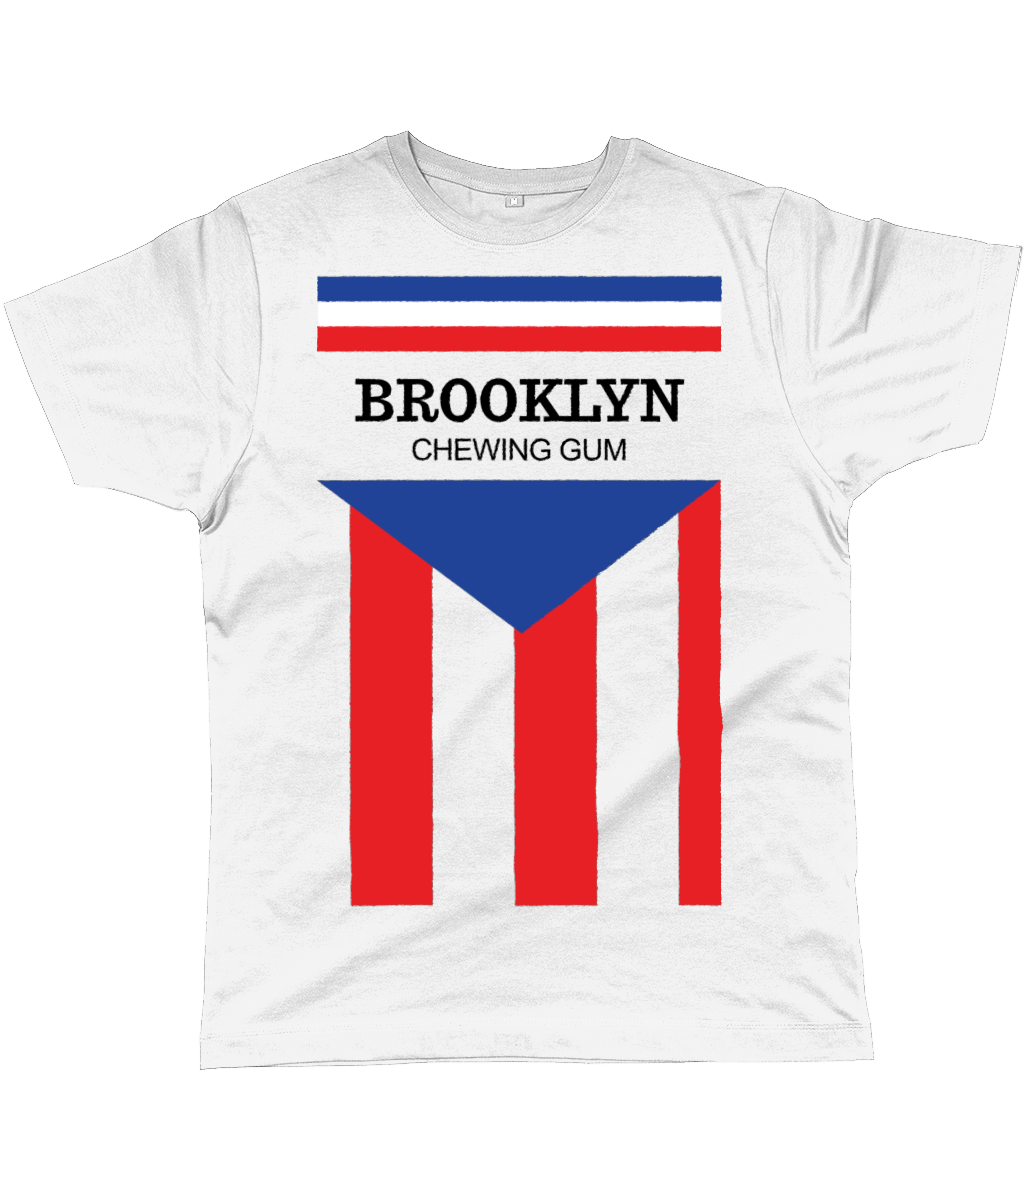 brooklyn chewing gum cycling jersey